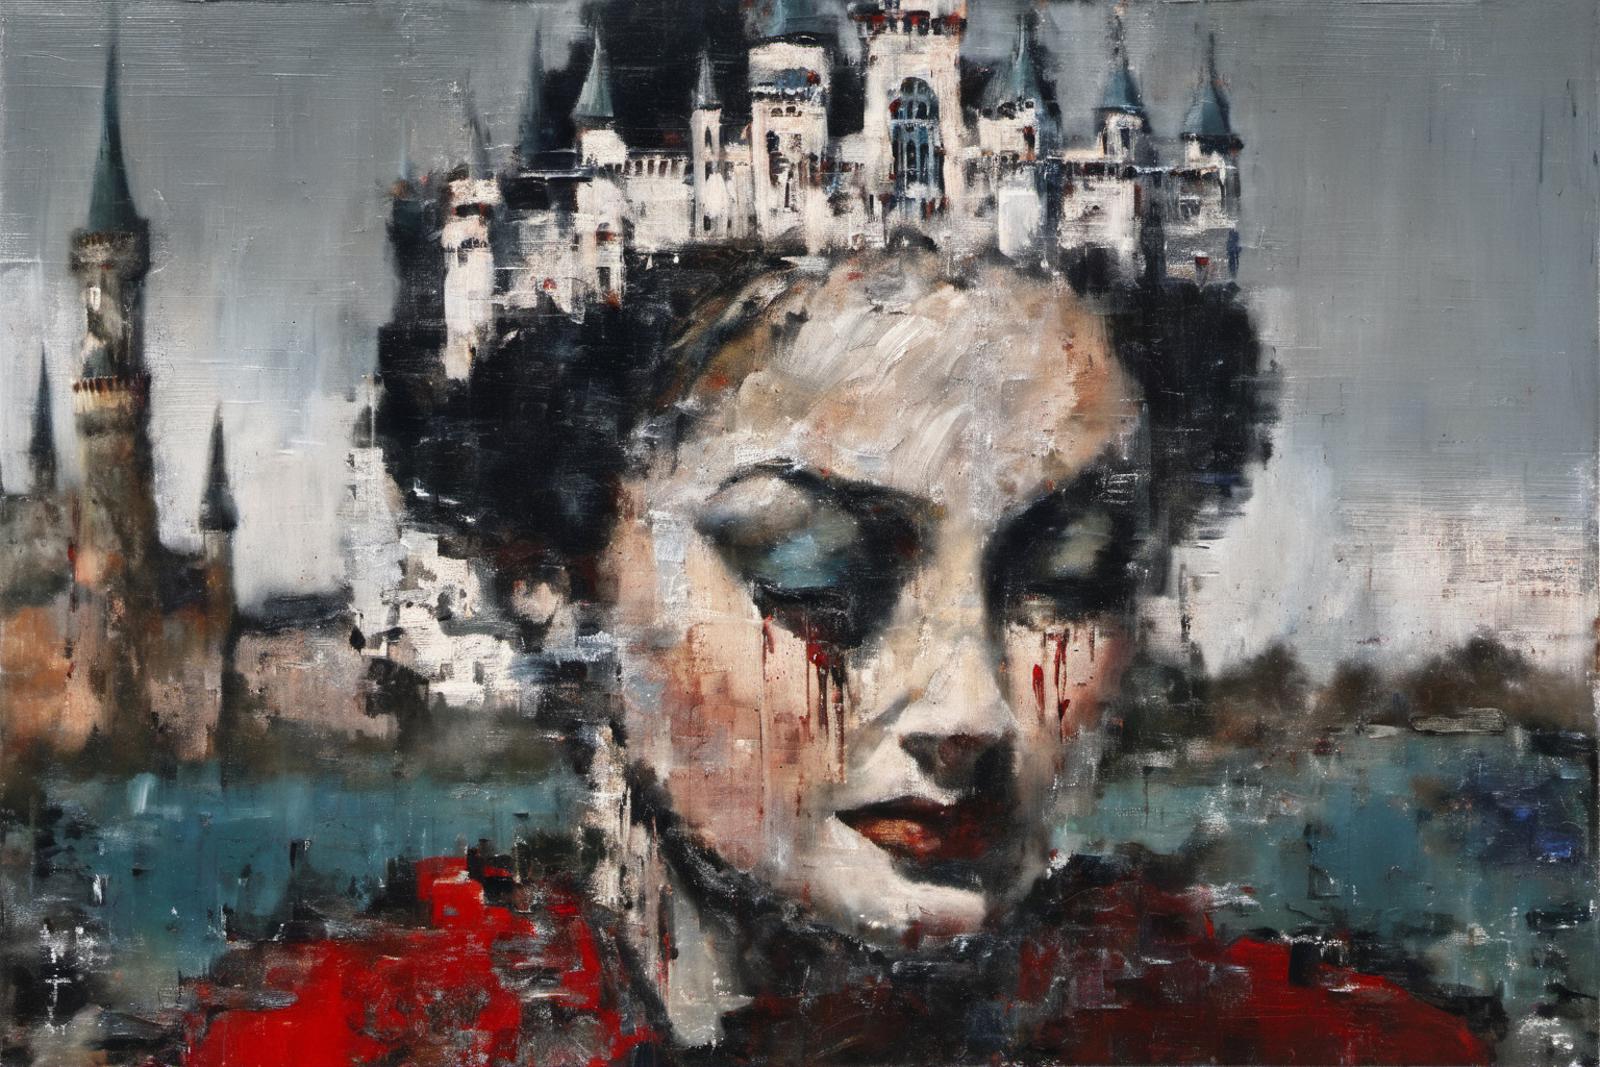 A painting of a woman with a castle on her head and blood on her forehead.